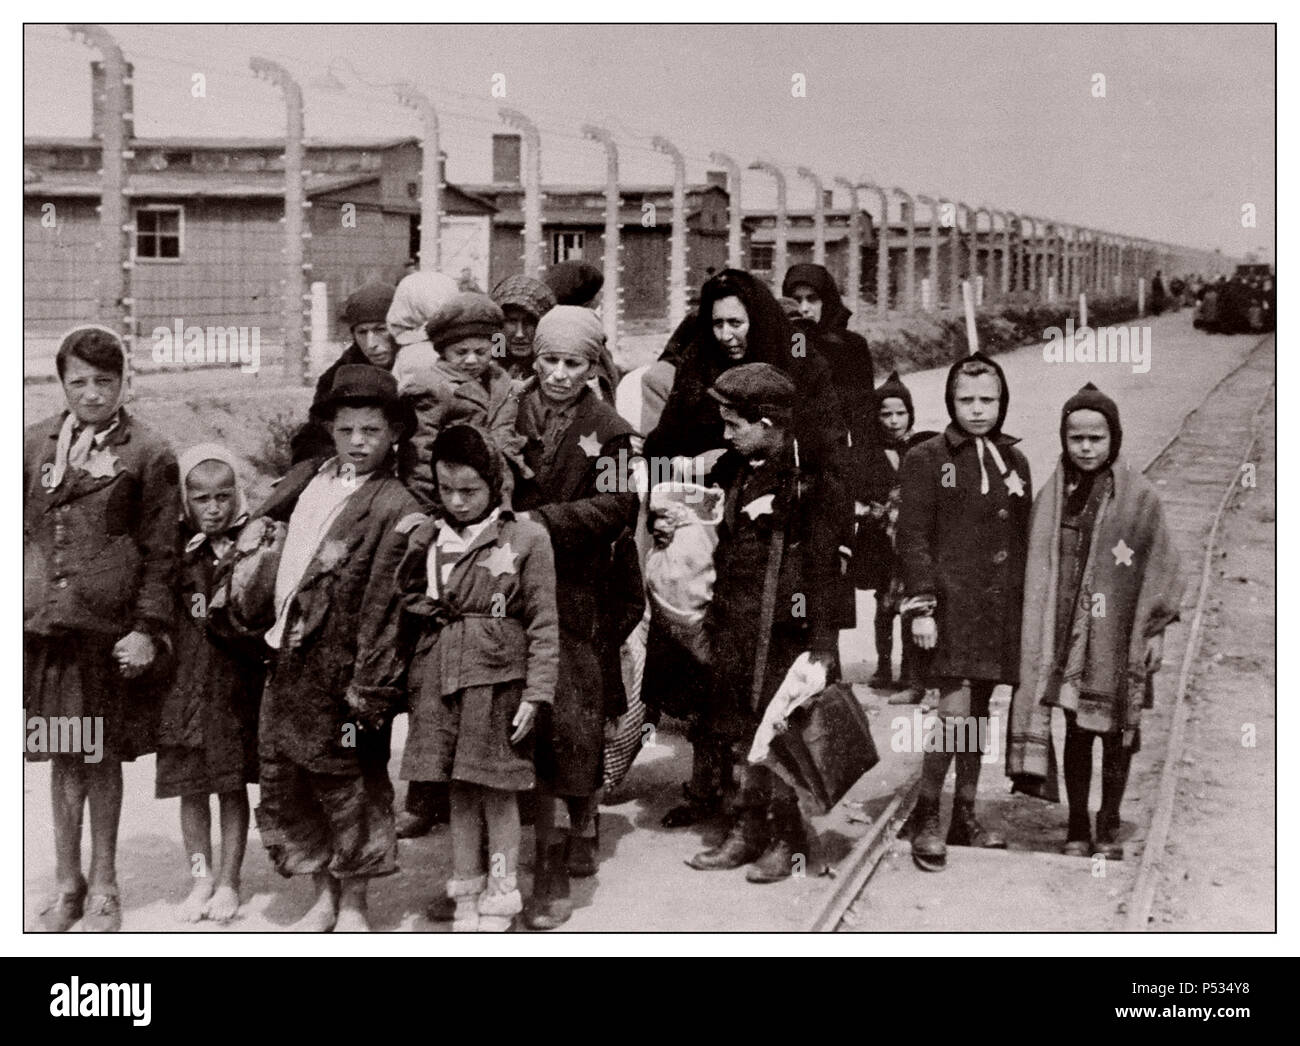 AUSCHWITZ Jewish children wearing Nazi designated yellow stars arrive in Auschwitz-Birkenau.  A WW2 German Nazi Concentration & Extermination camp. Jewish children made largest group deported to the camp. They were usually sent there along with adults, beginning in early 1942, as part of the “final solution of the Jewish question”—the total destruction of the Jewish population of Europe...Auschwitz concentration camp was a network of German Nazi concentration camps and extermination camps built and operated by the Third Reich in Polish areas annexed by Nazi Germany during World War II. Stock Photo